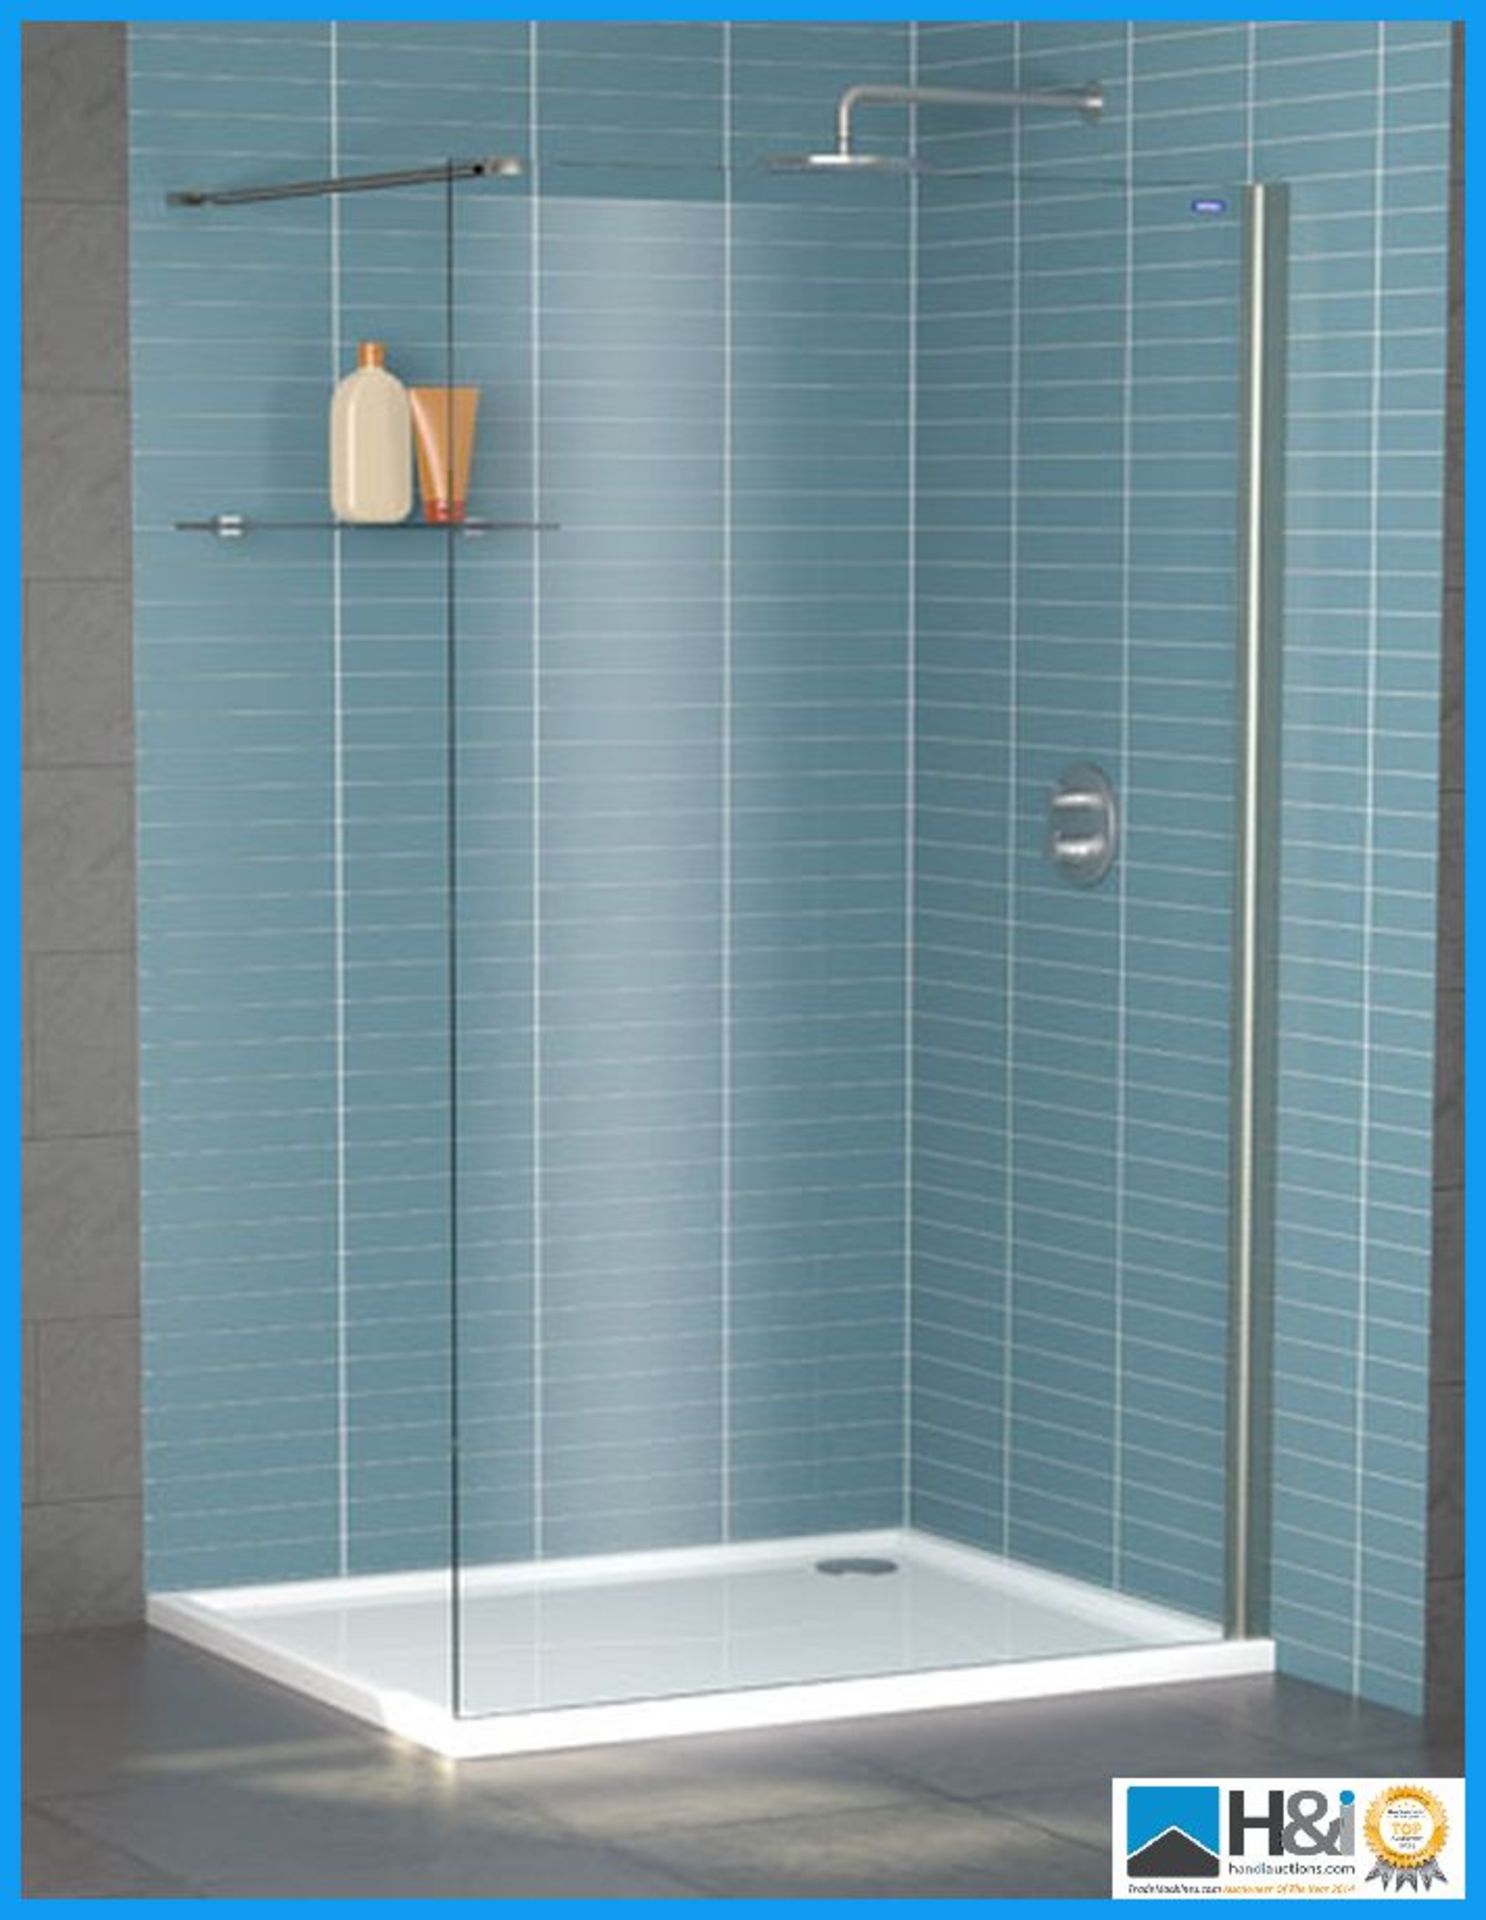 Showerlux Legacy Wetroom Panel 1900mm x 1000mm...T8mm Tempered Glass With Brace Bar (1200mm)...